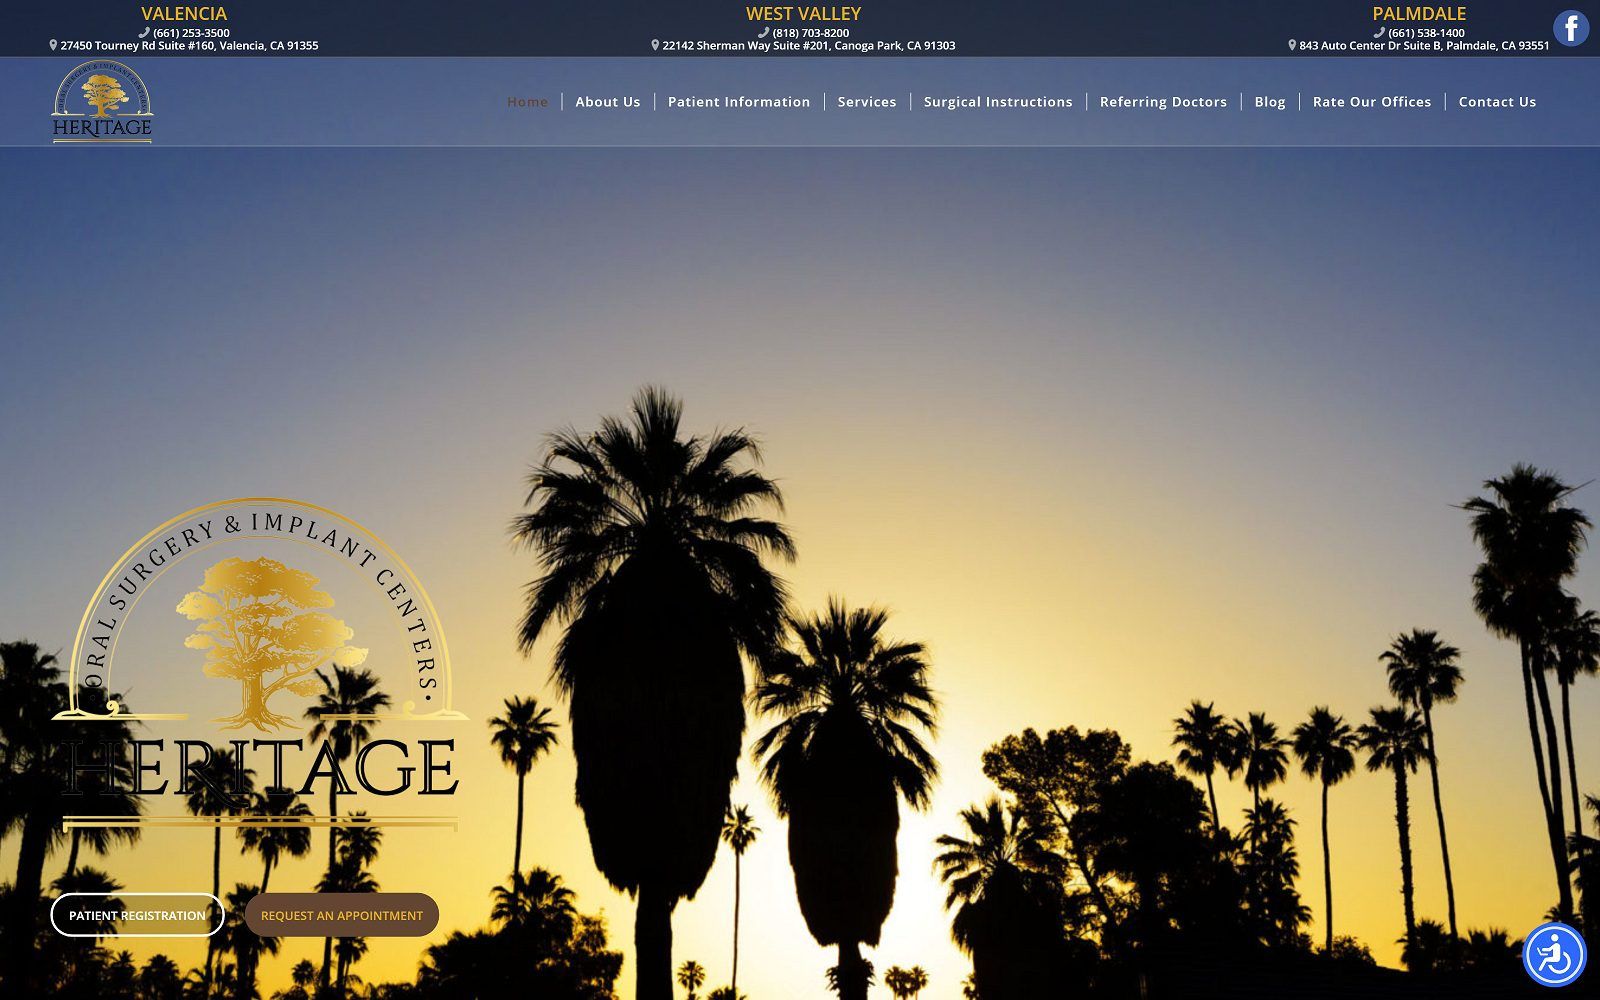 The screenshot of heritage oral surgery & implant centers - palmdale heritageoralsurgery. Com website